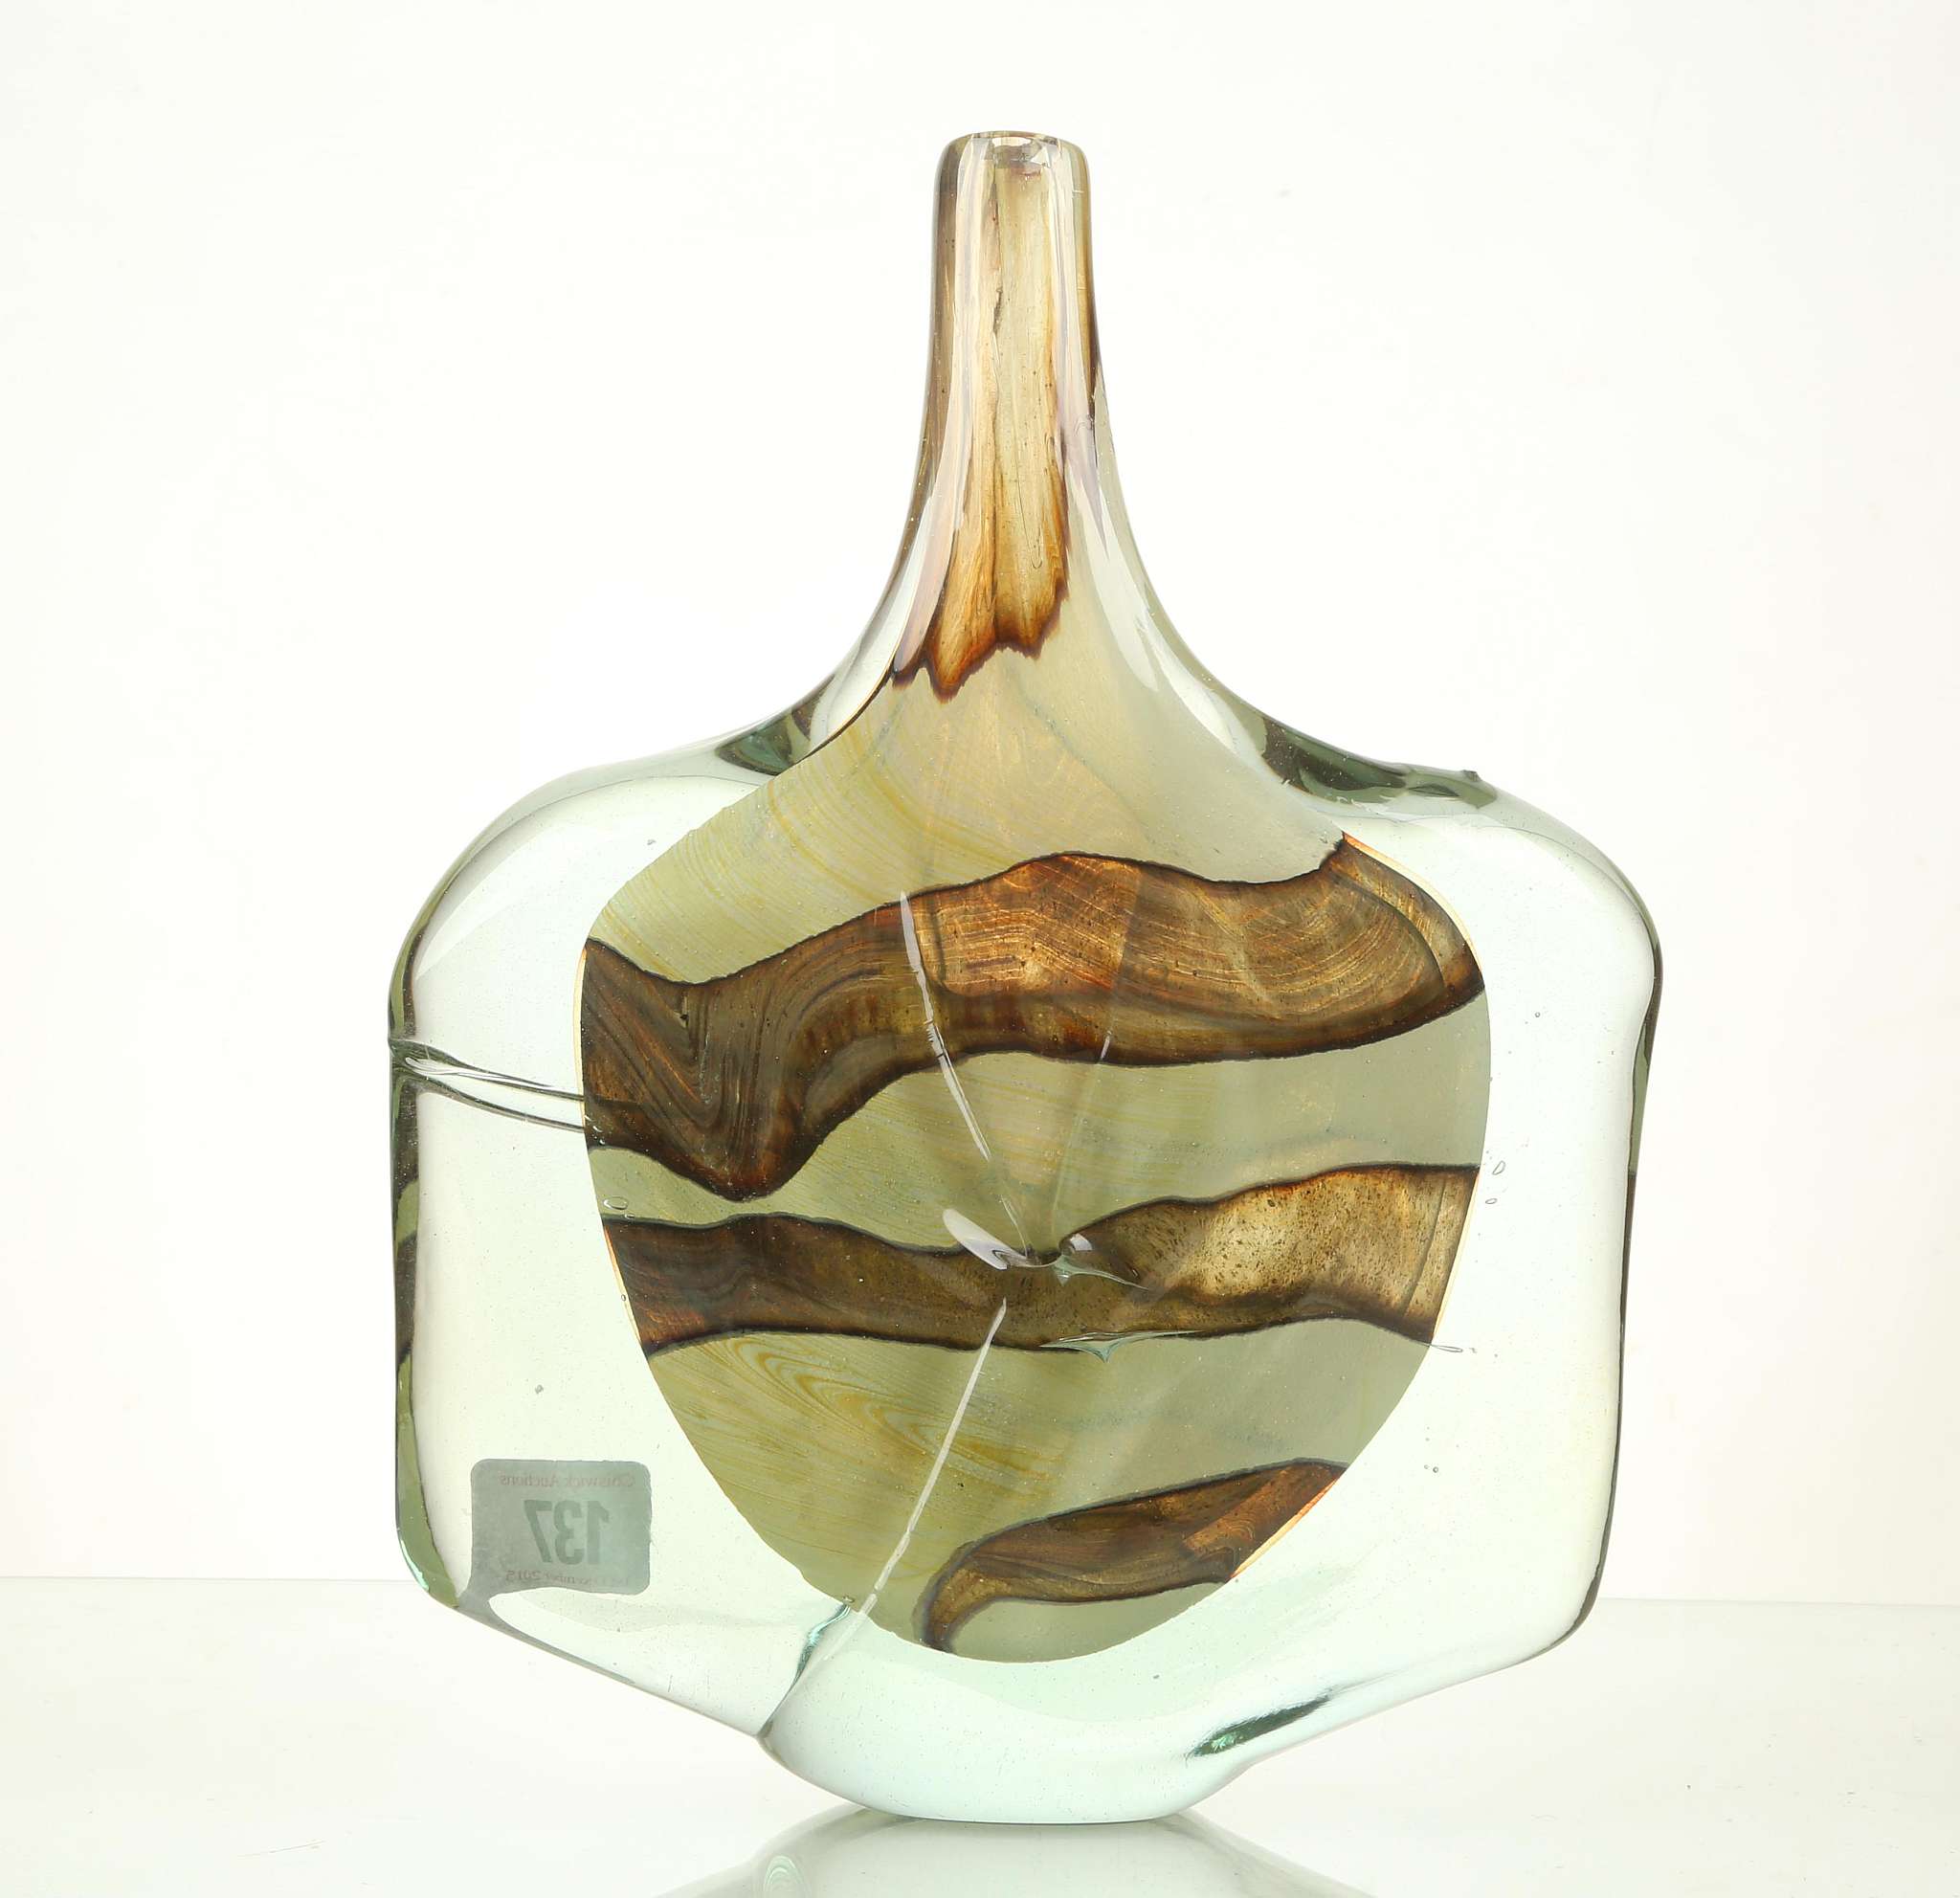 A MDINA FISH VASE, mid 20th century, green and brown clear cased glass, (21 x 27cm high) - Image 4 of 5